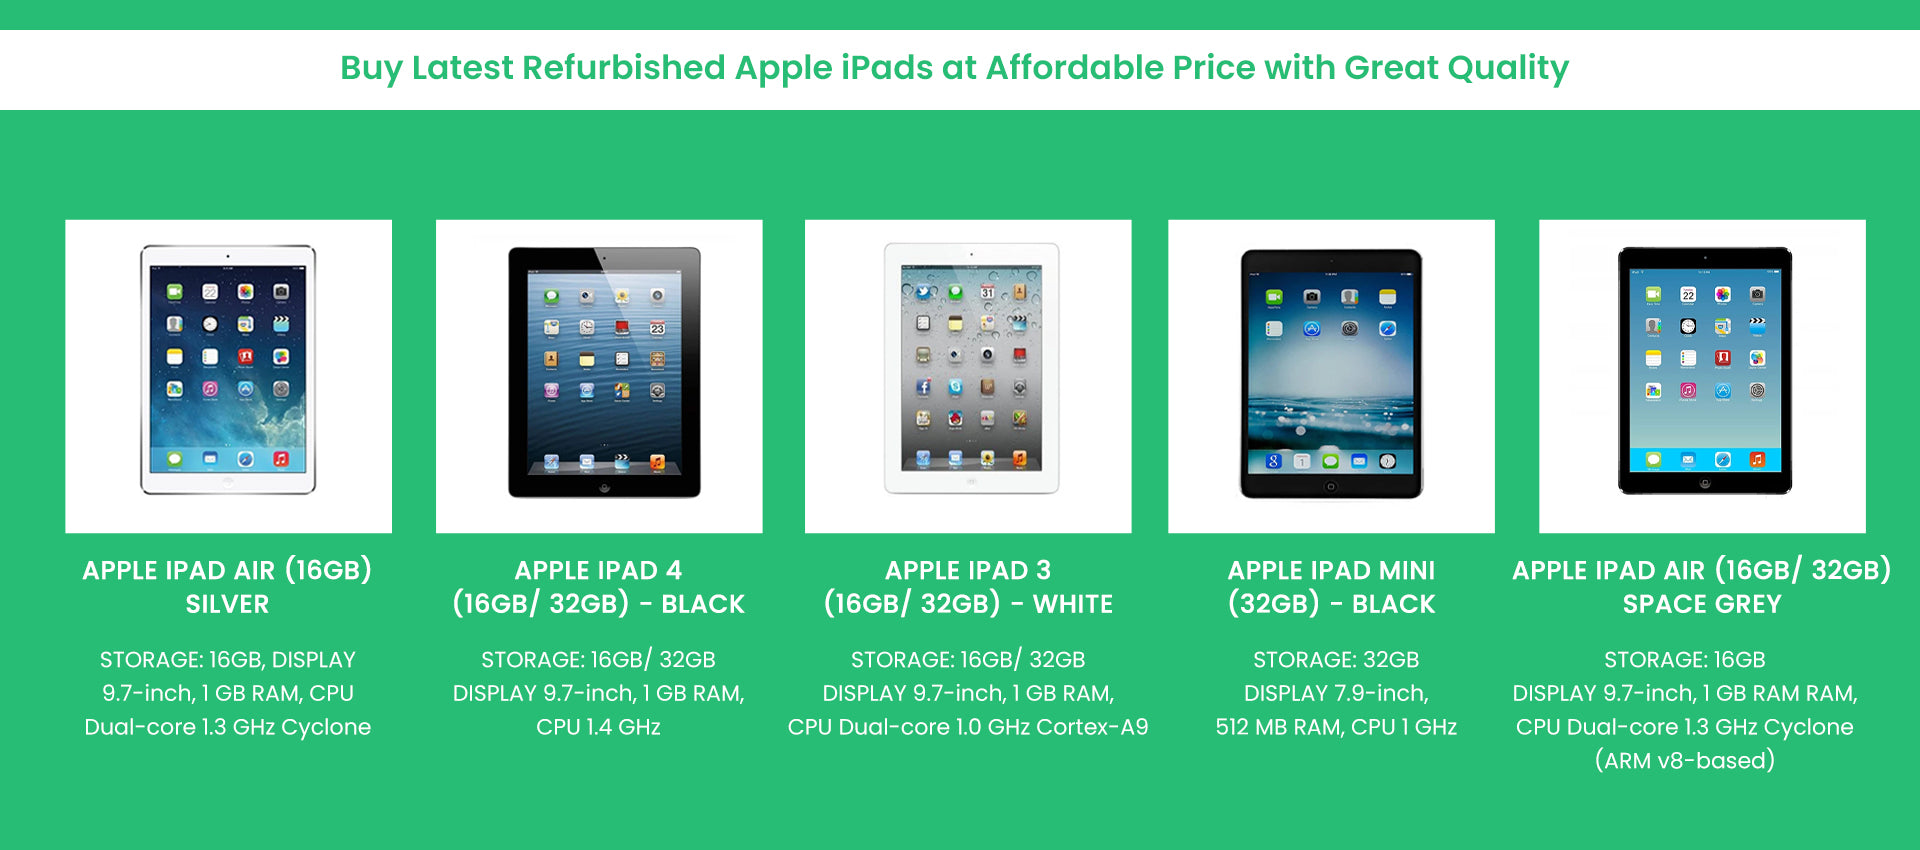 Cheap Refurbished iPads for Sale - No Place Better than Loop8